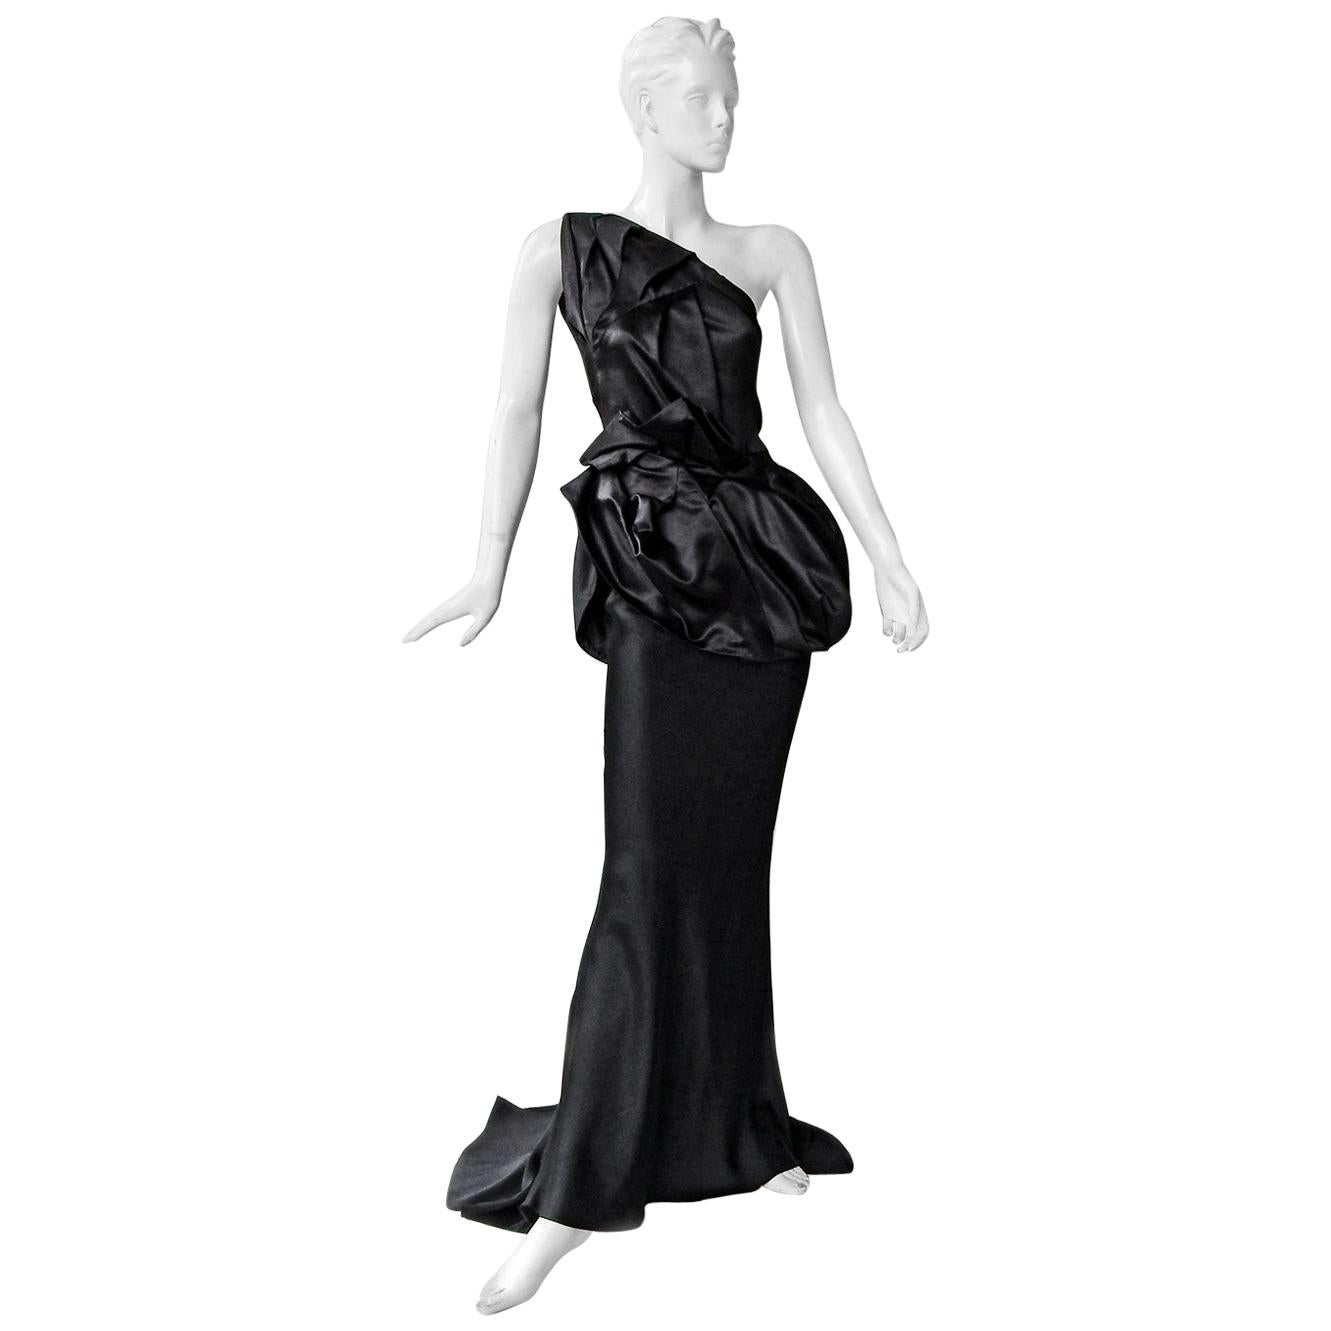 Christian Dior by John Galliano Sophisticated and Dramatic Dress Gown   Rare